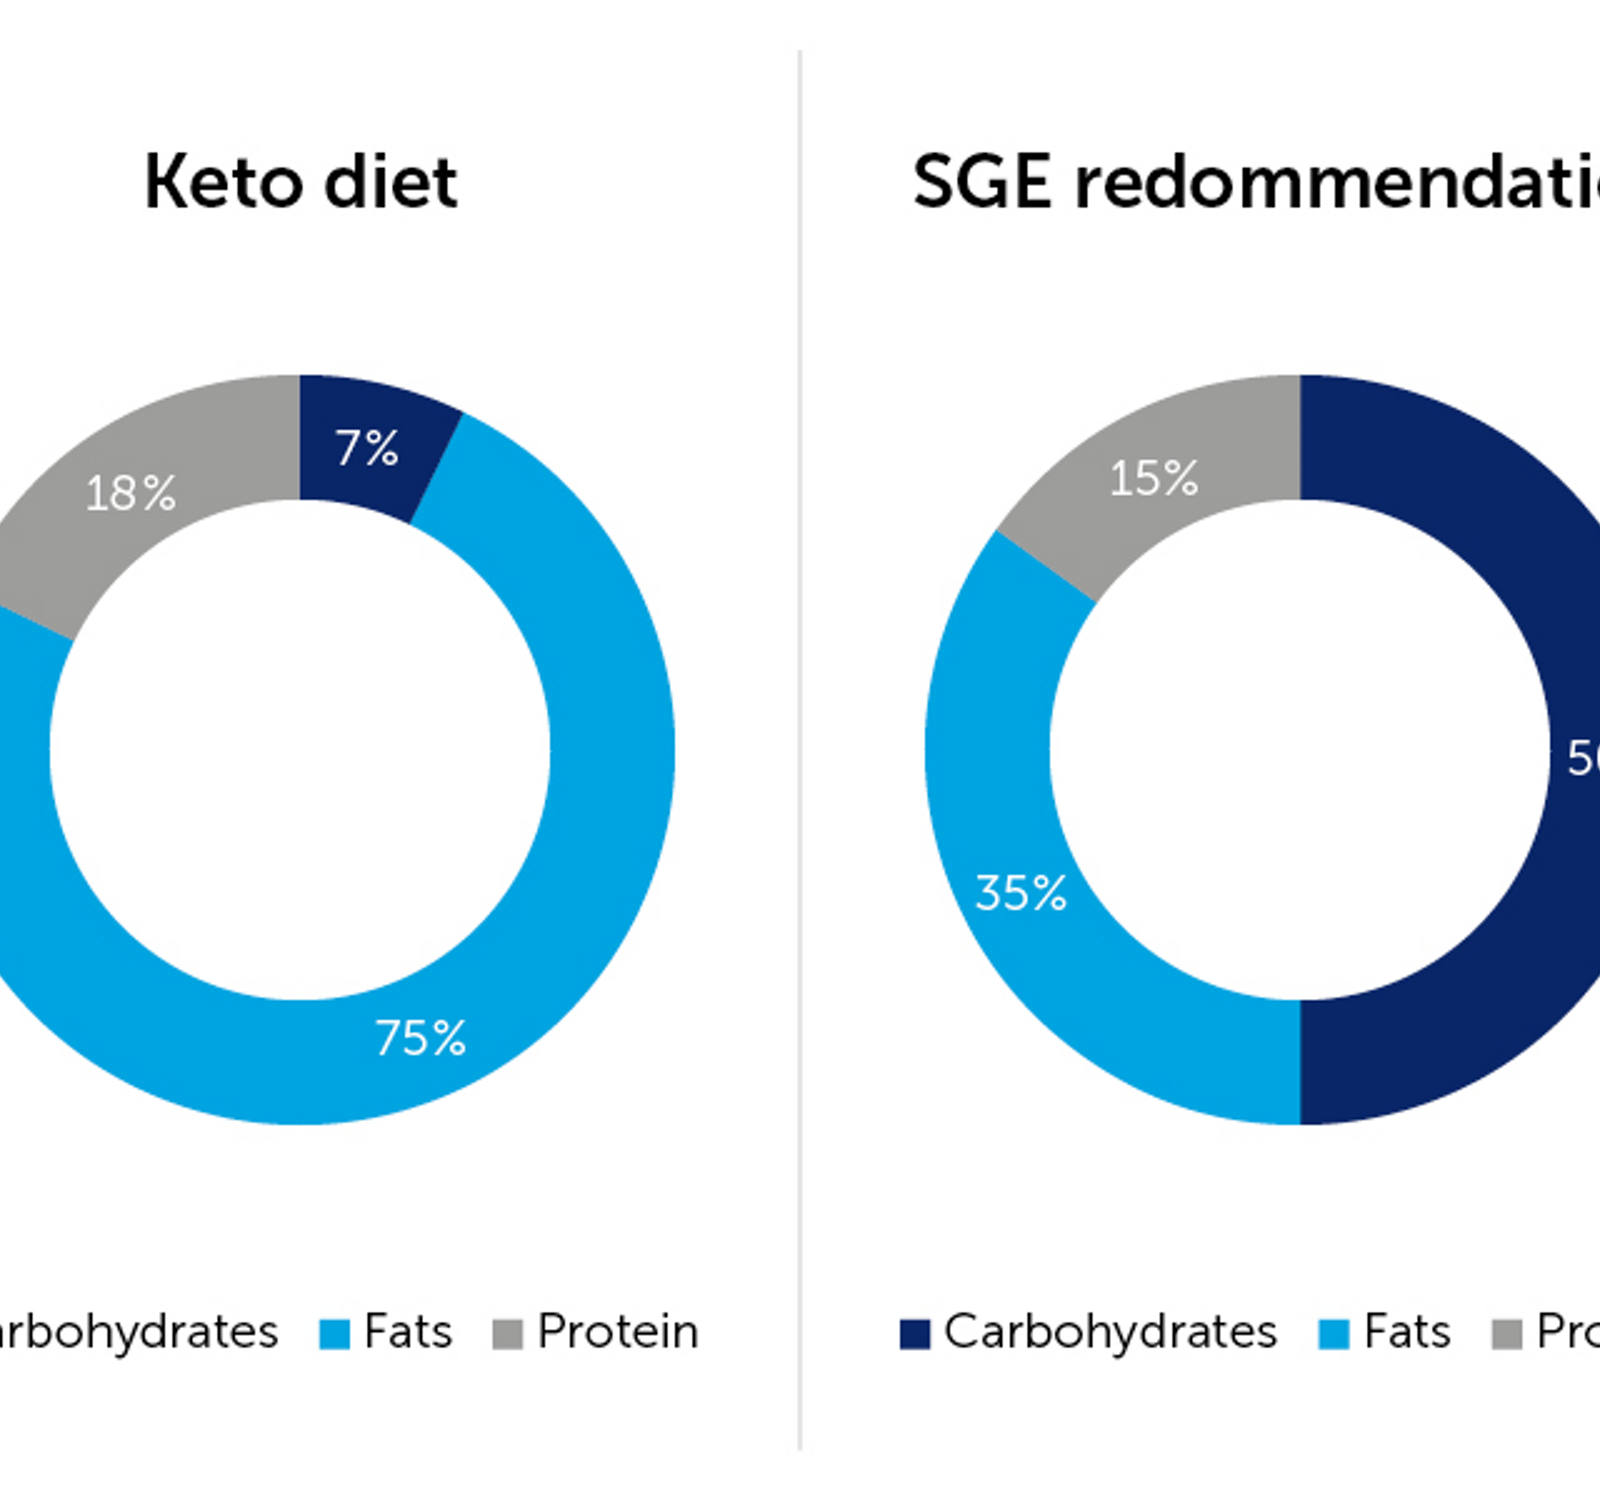 Keto Diet vs. SGE Recommendation: Comparison Distribution of Carbohydrates, Fats & Protein